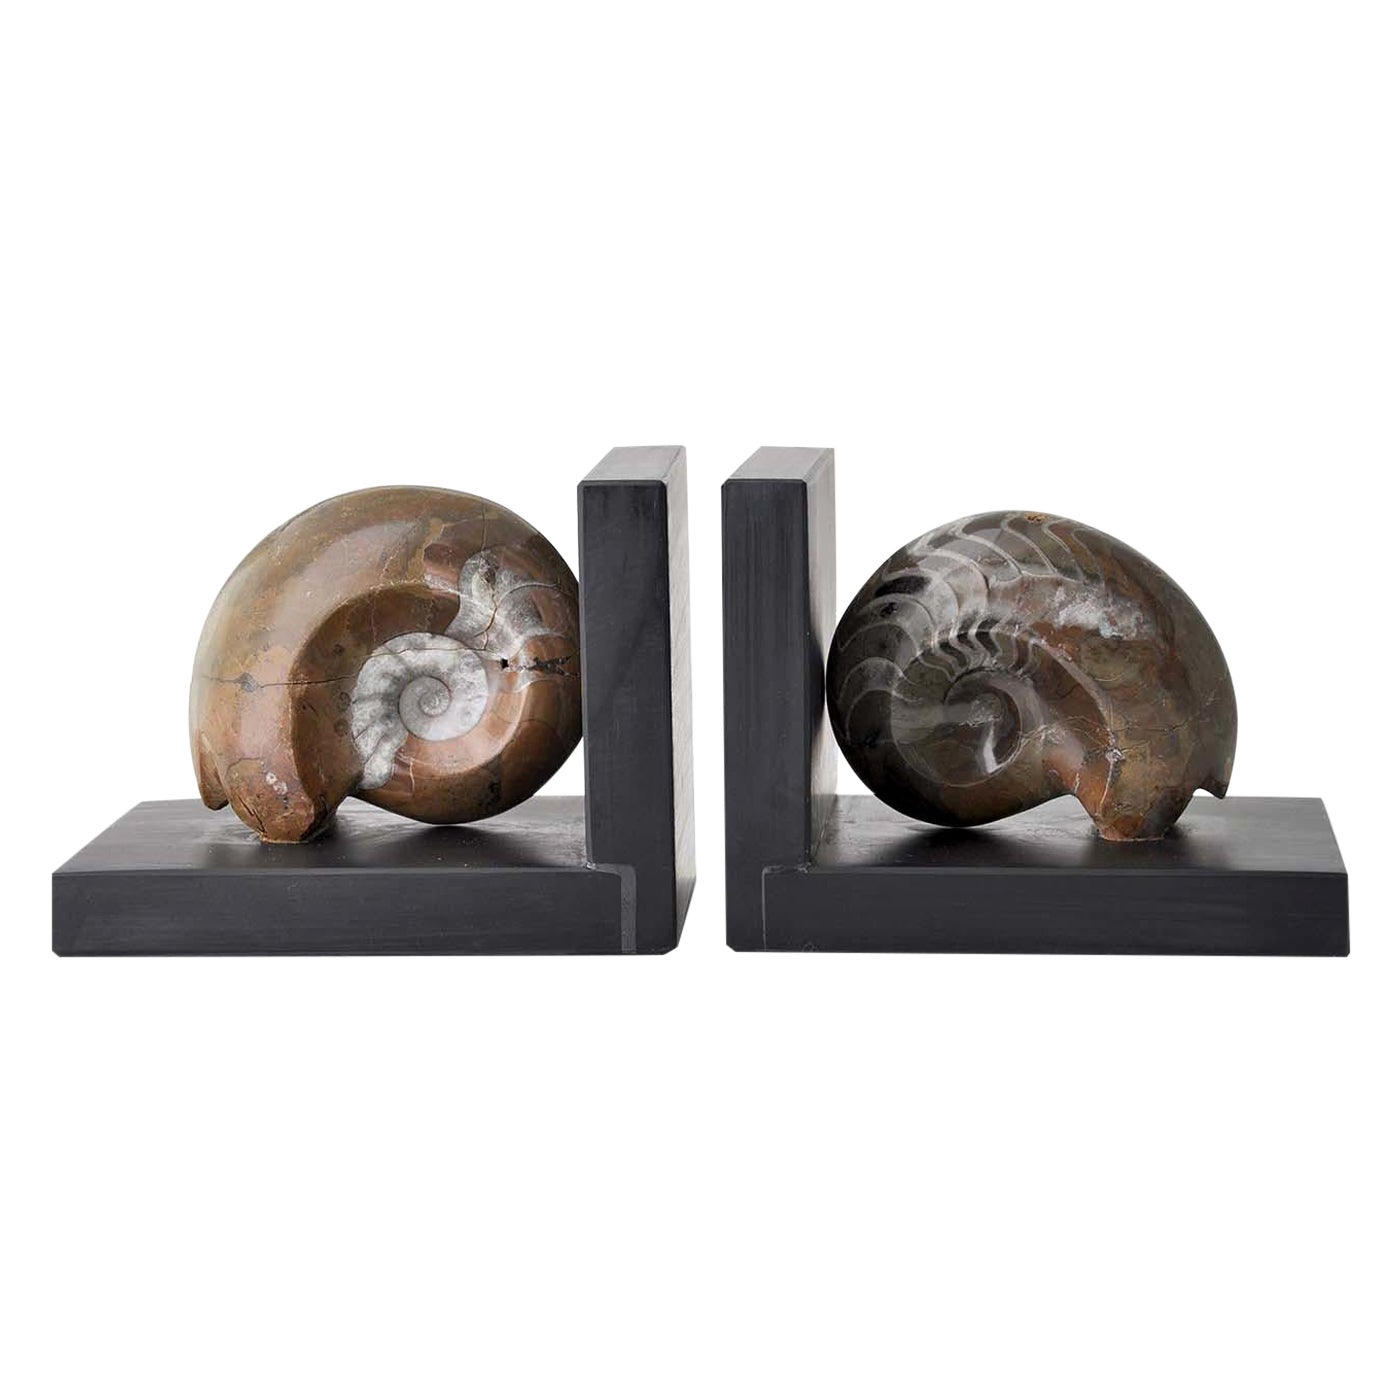 Fossiline Brown Shell Bookends by Nino Basso For Sale